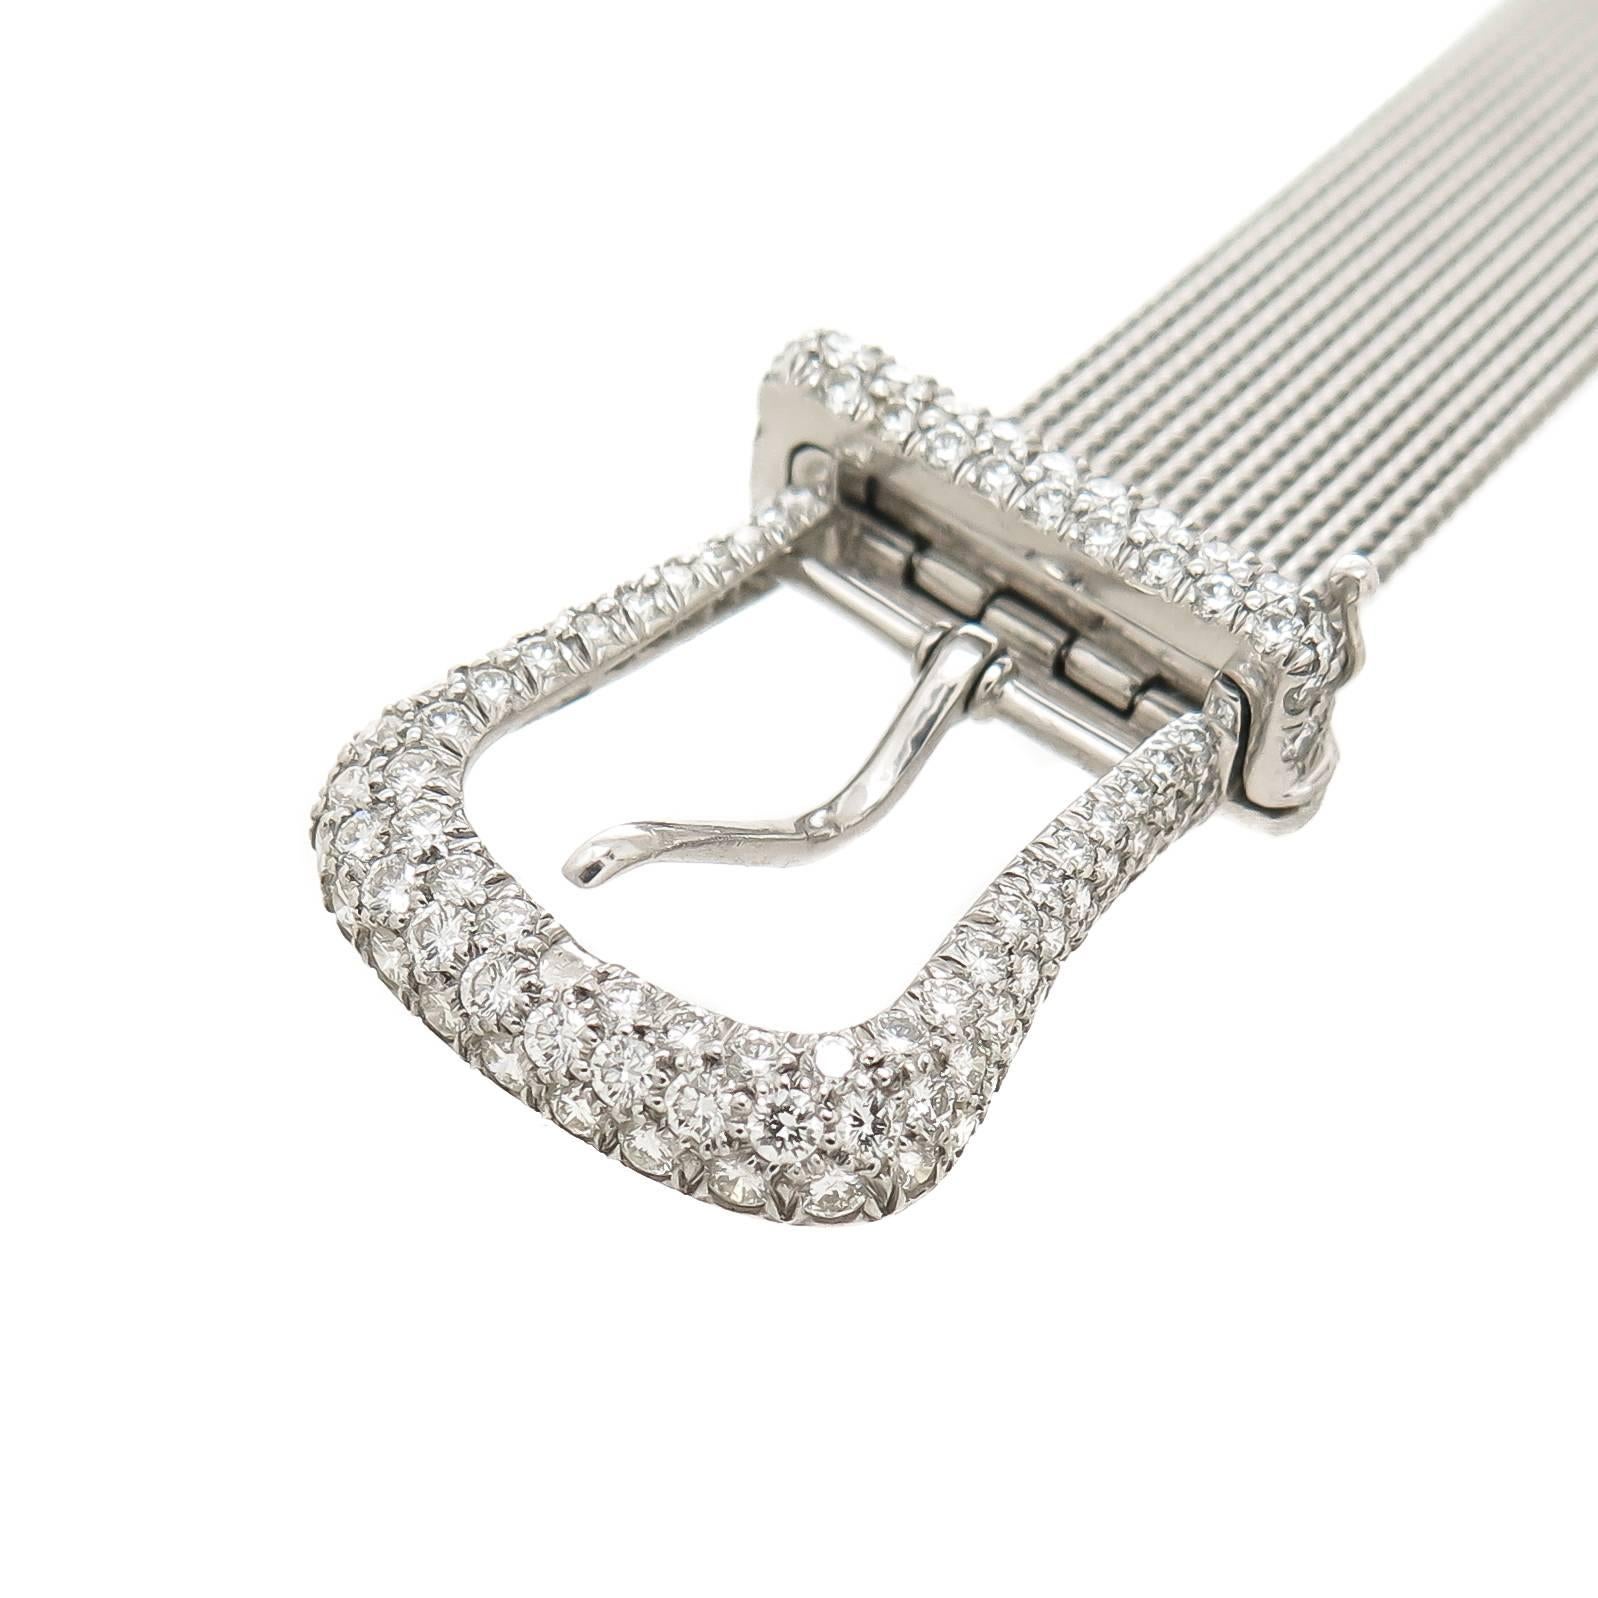 Circa 2000 Tiffany & Co. Platinum Mesh Buckle Bracelet, measuring 1/2 inch wide 1.75 MM thick and weighs 48 Grams. Set with 3 Carats of Fine White Round Brilliant cut Diamonds. Total Bracelet length 8 3/4 inch and is adjustable to fit most any size